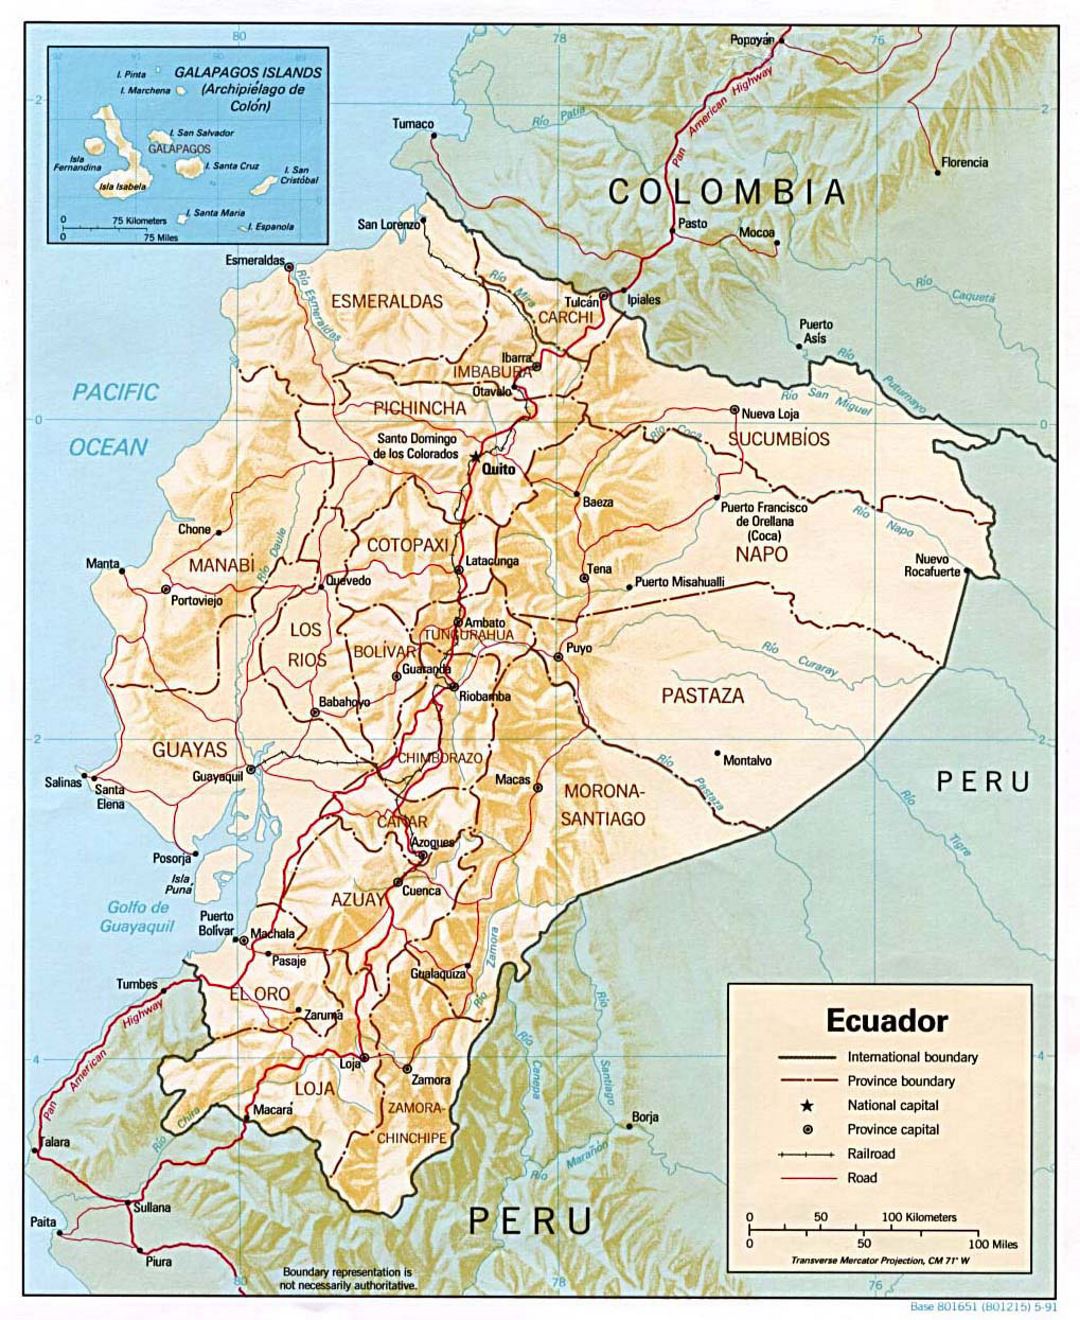 Detailed political and administrative map of Ecuador with relief, major roads and major cities - 1991